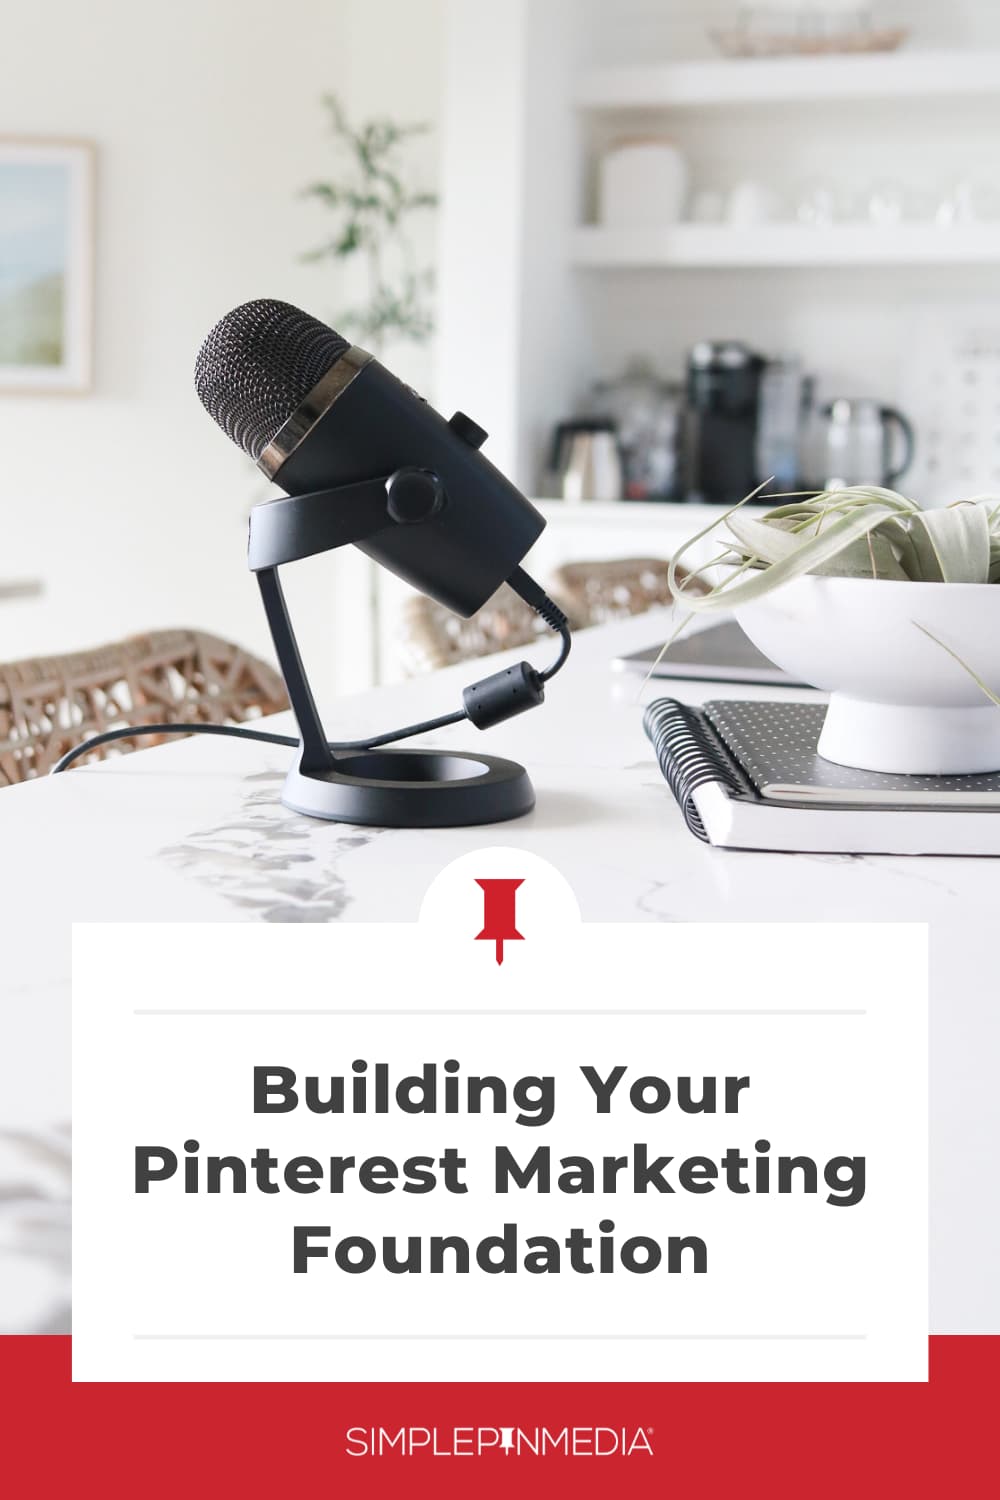 308 – Getting Started with Pinterest Marketing